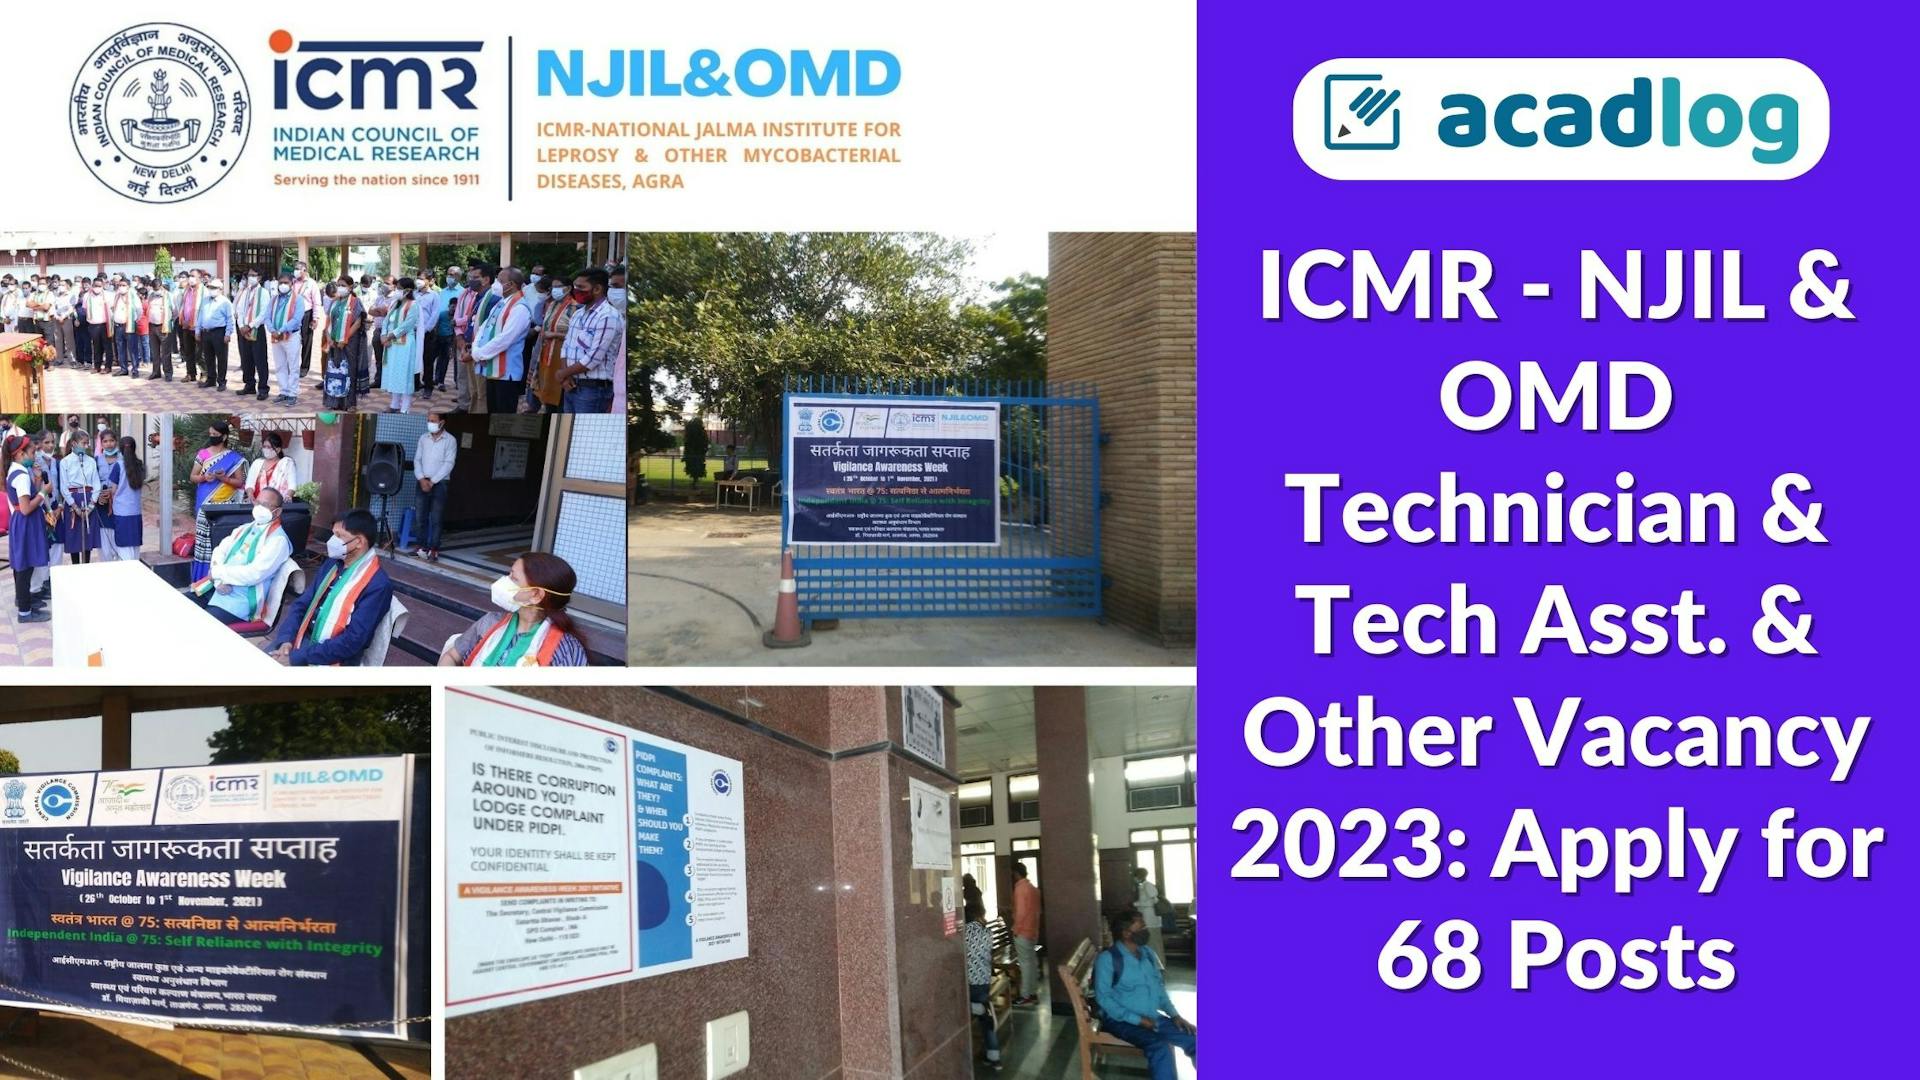 ICMR - NJIL&OMD Technician & Tech Asst. & Other Vacancy 2023: Apply for 68 Posts